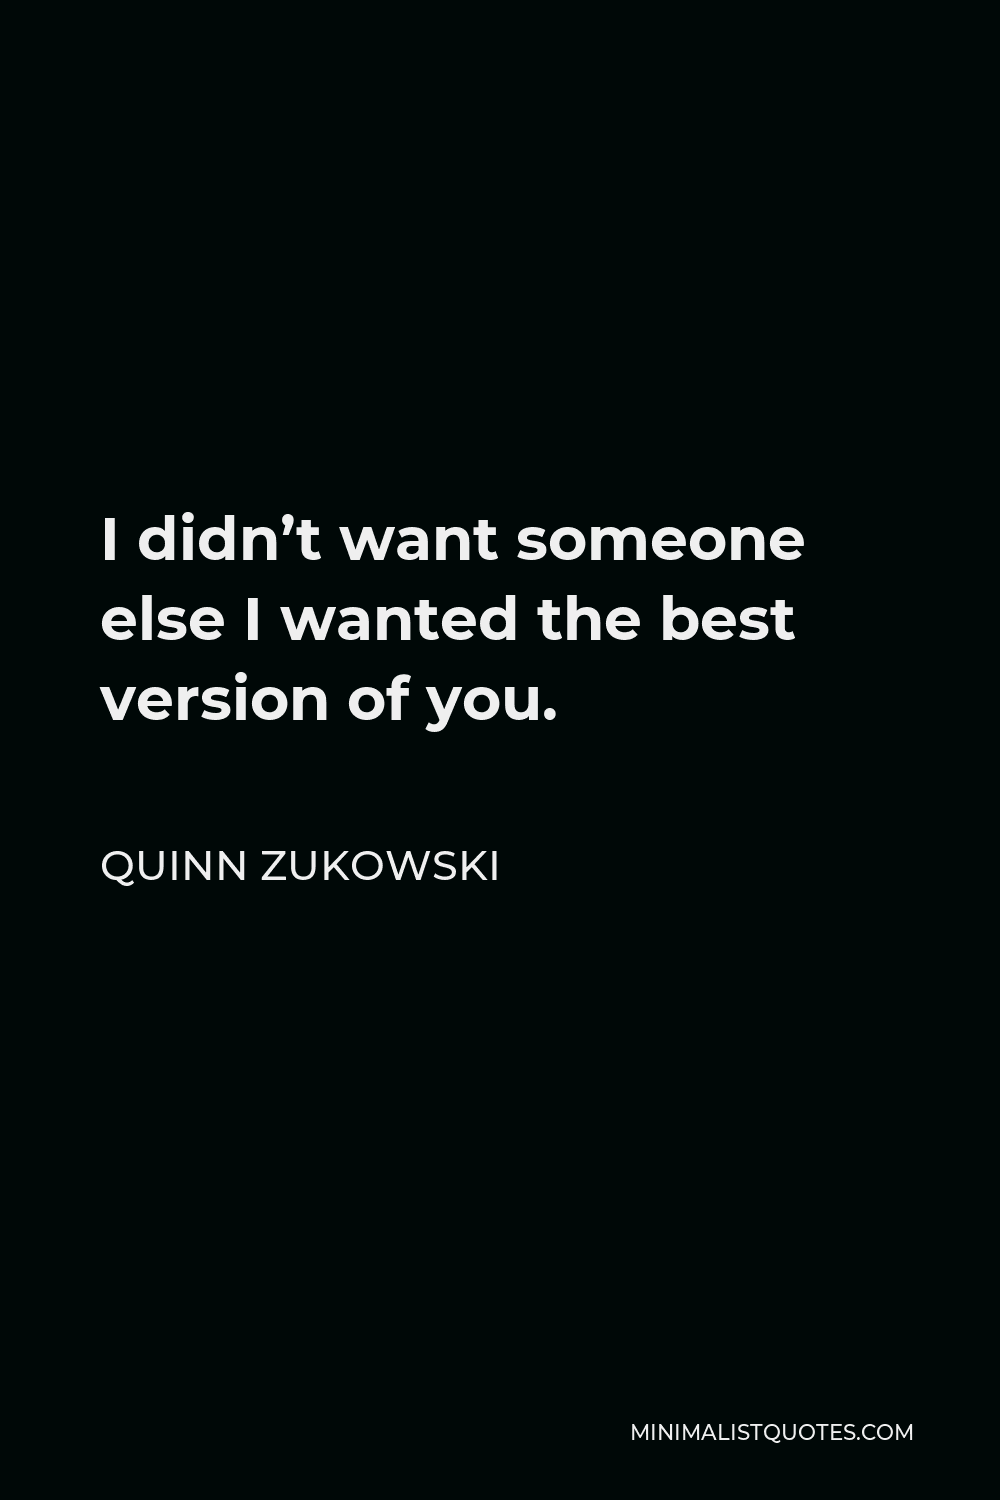 Quinn Zukowski Quote - I didn’t want someone else I wanted the best version of you.